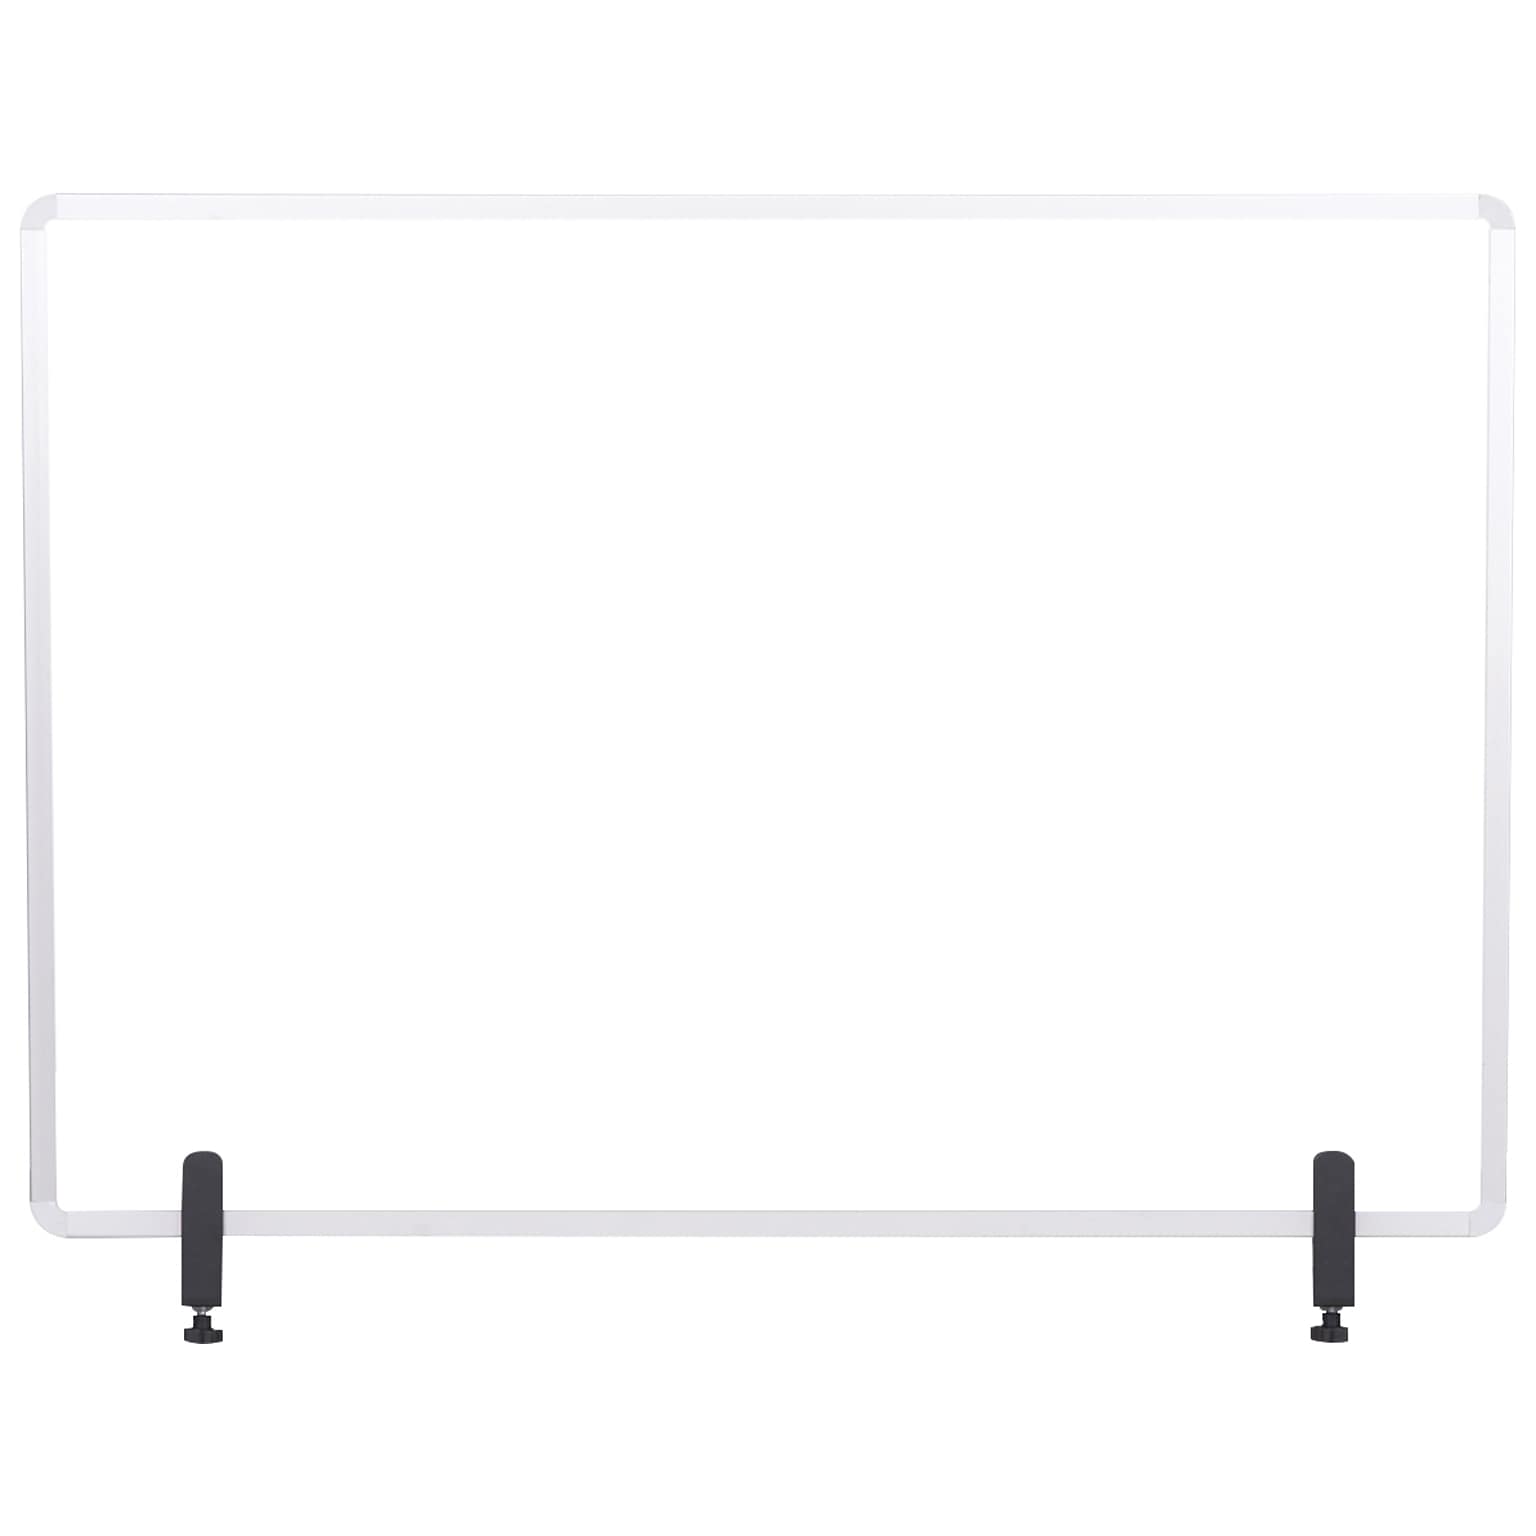 MasterVision Protector Series 23.6 x 35.4 Glass Non-Tackable Desktop Divider, Clear (GL07019101)